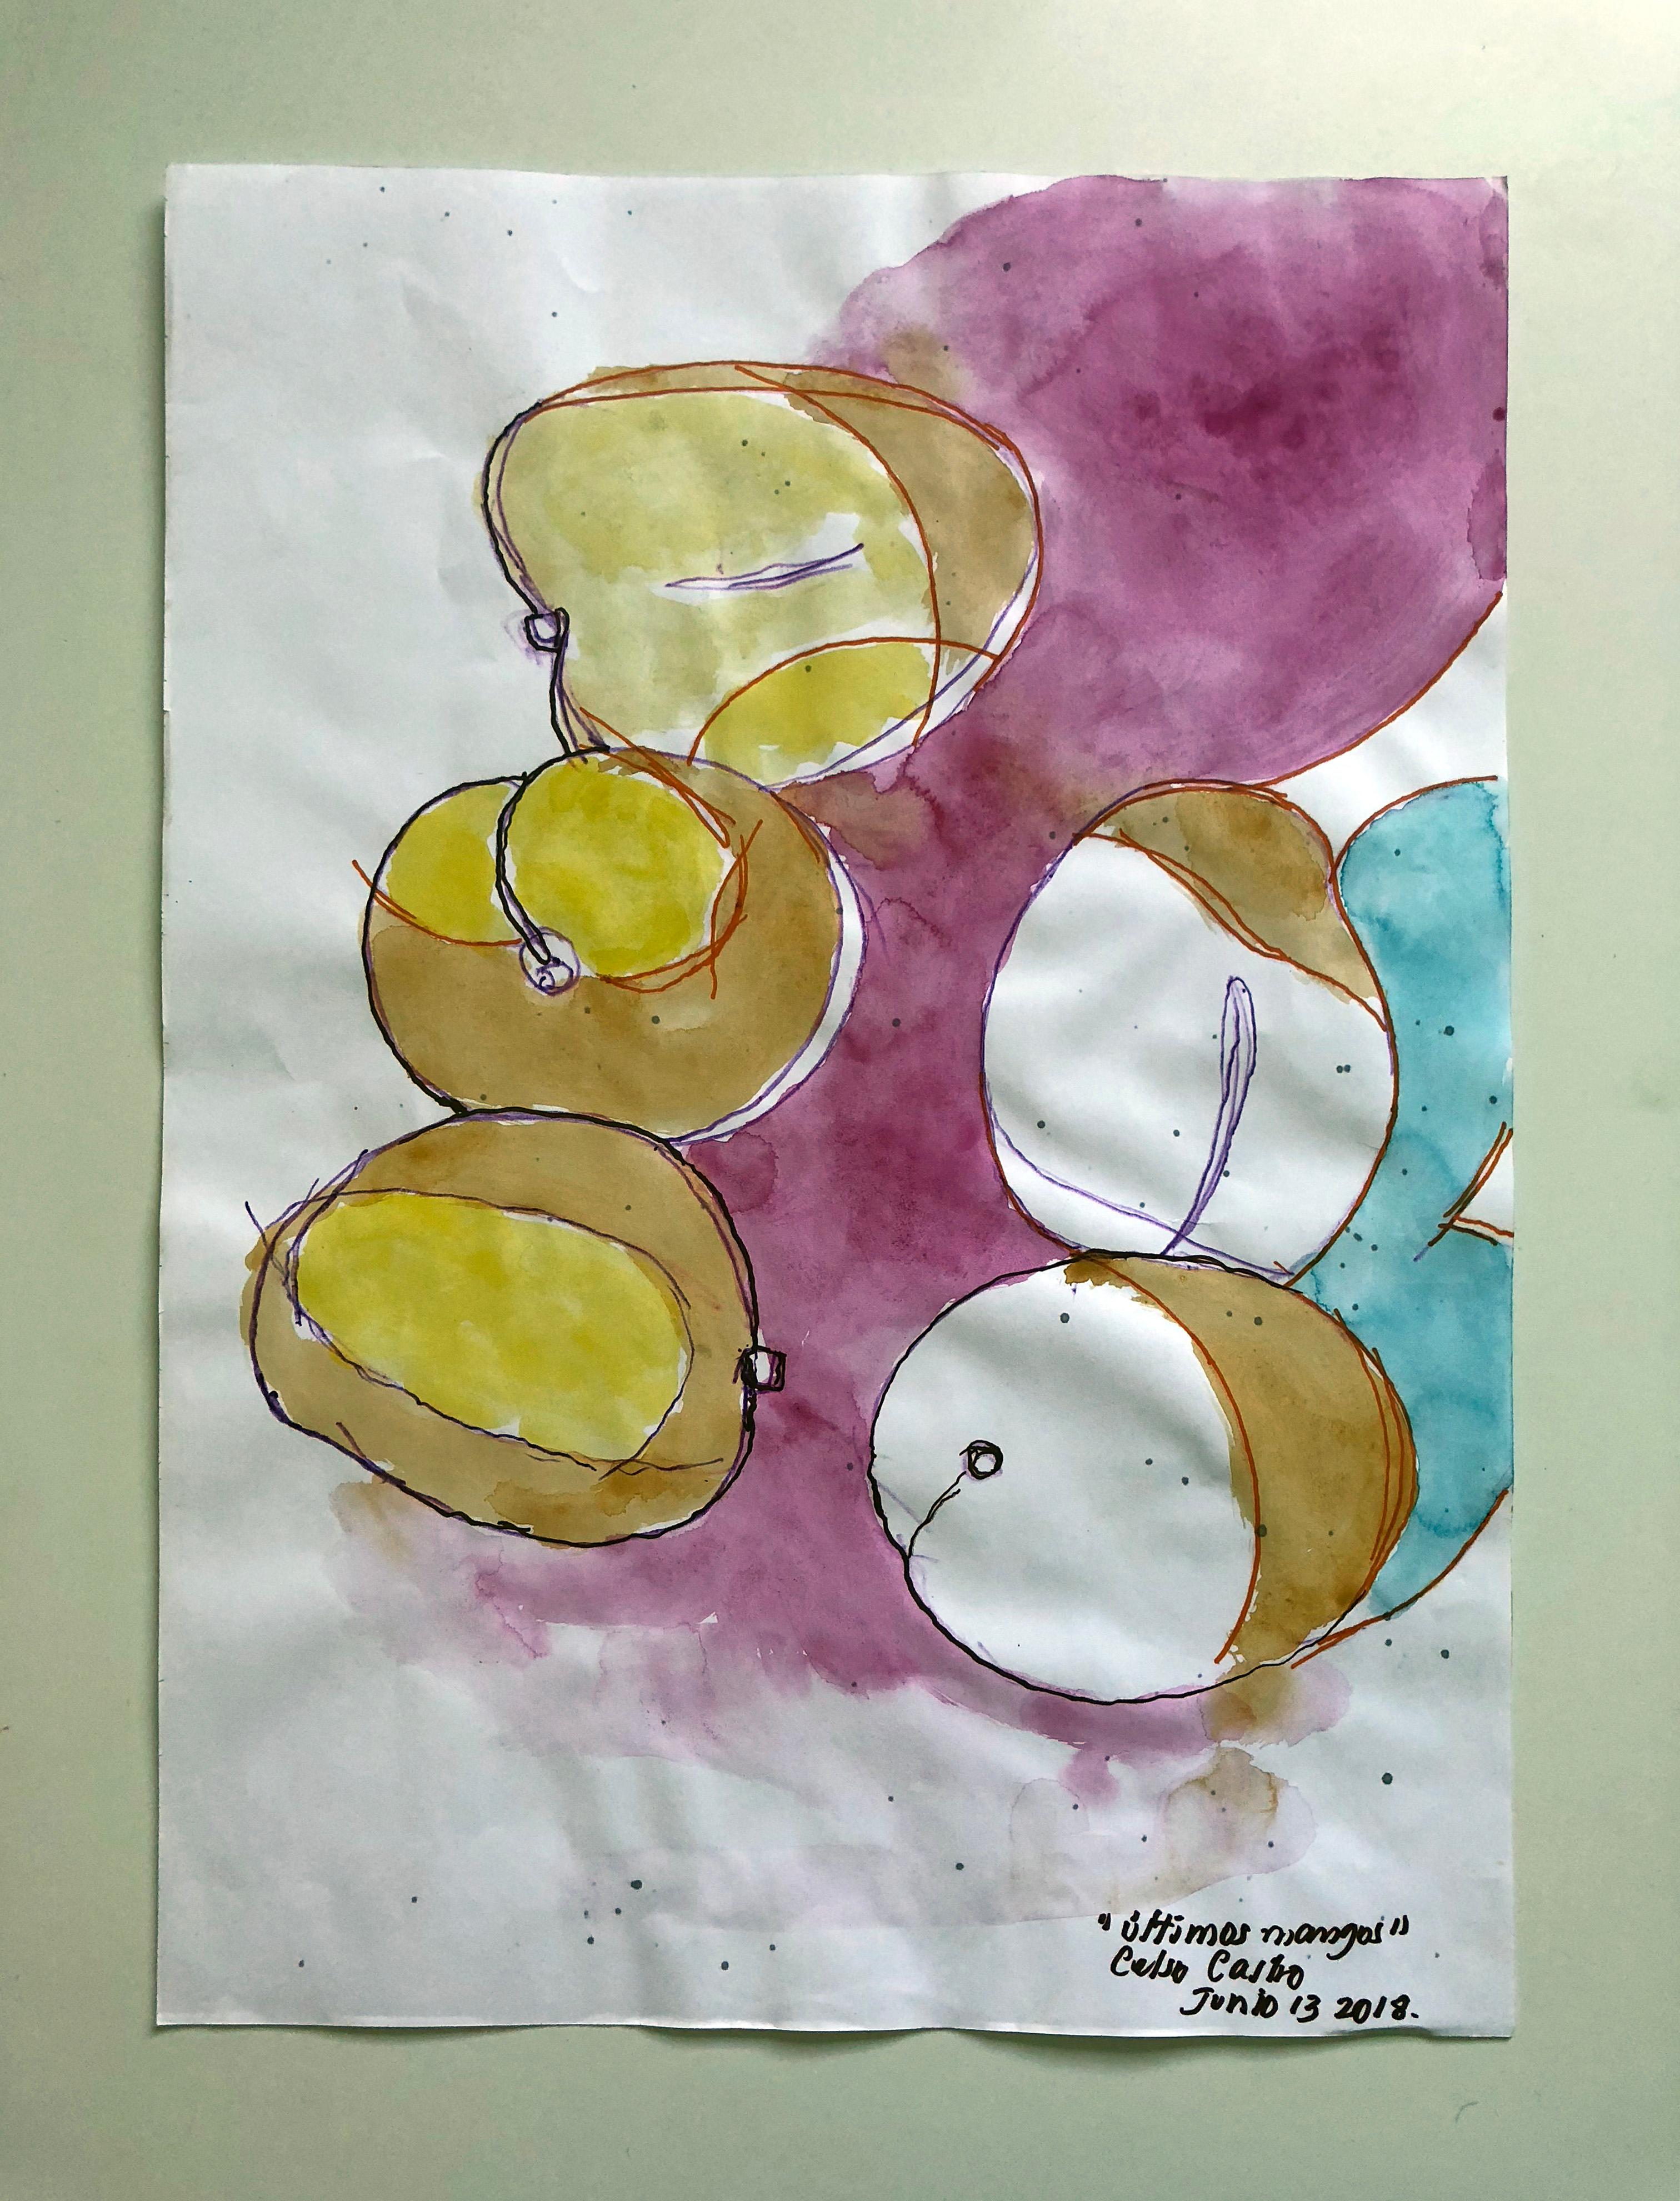 Últimos Mangos by Celso Castro
Watercolor and ink on archival paper
Individual size: 19.38 in. H x 13.5 in. W
Overall size: 19.38 in. H x 40.5 in. W
One of a kind
2018

Celso Castro-Daza was born in Valledupar, Colombia. He has a BFA from